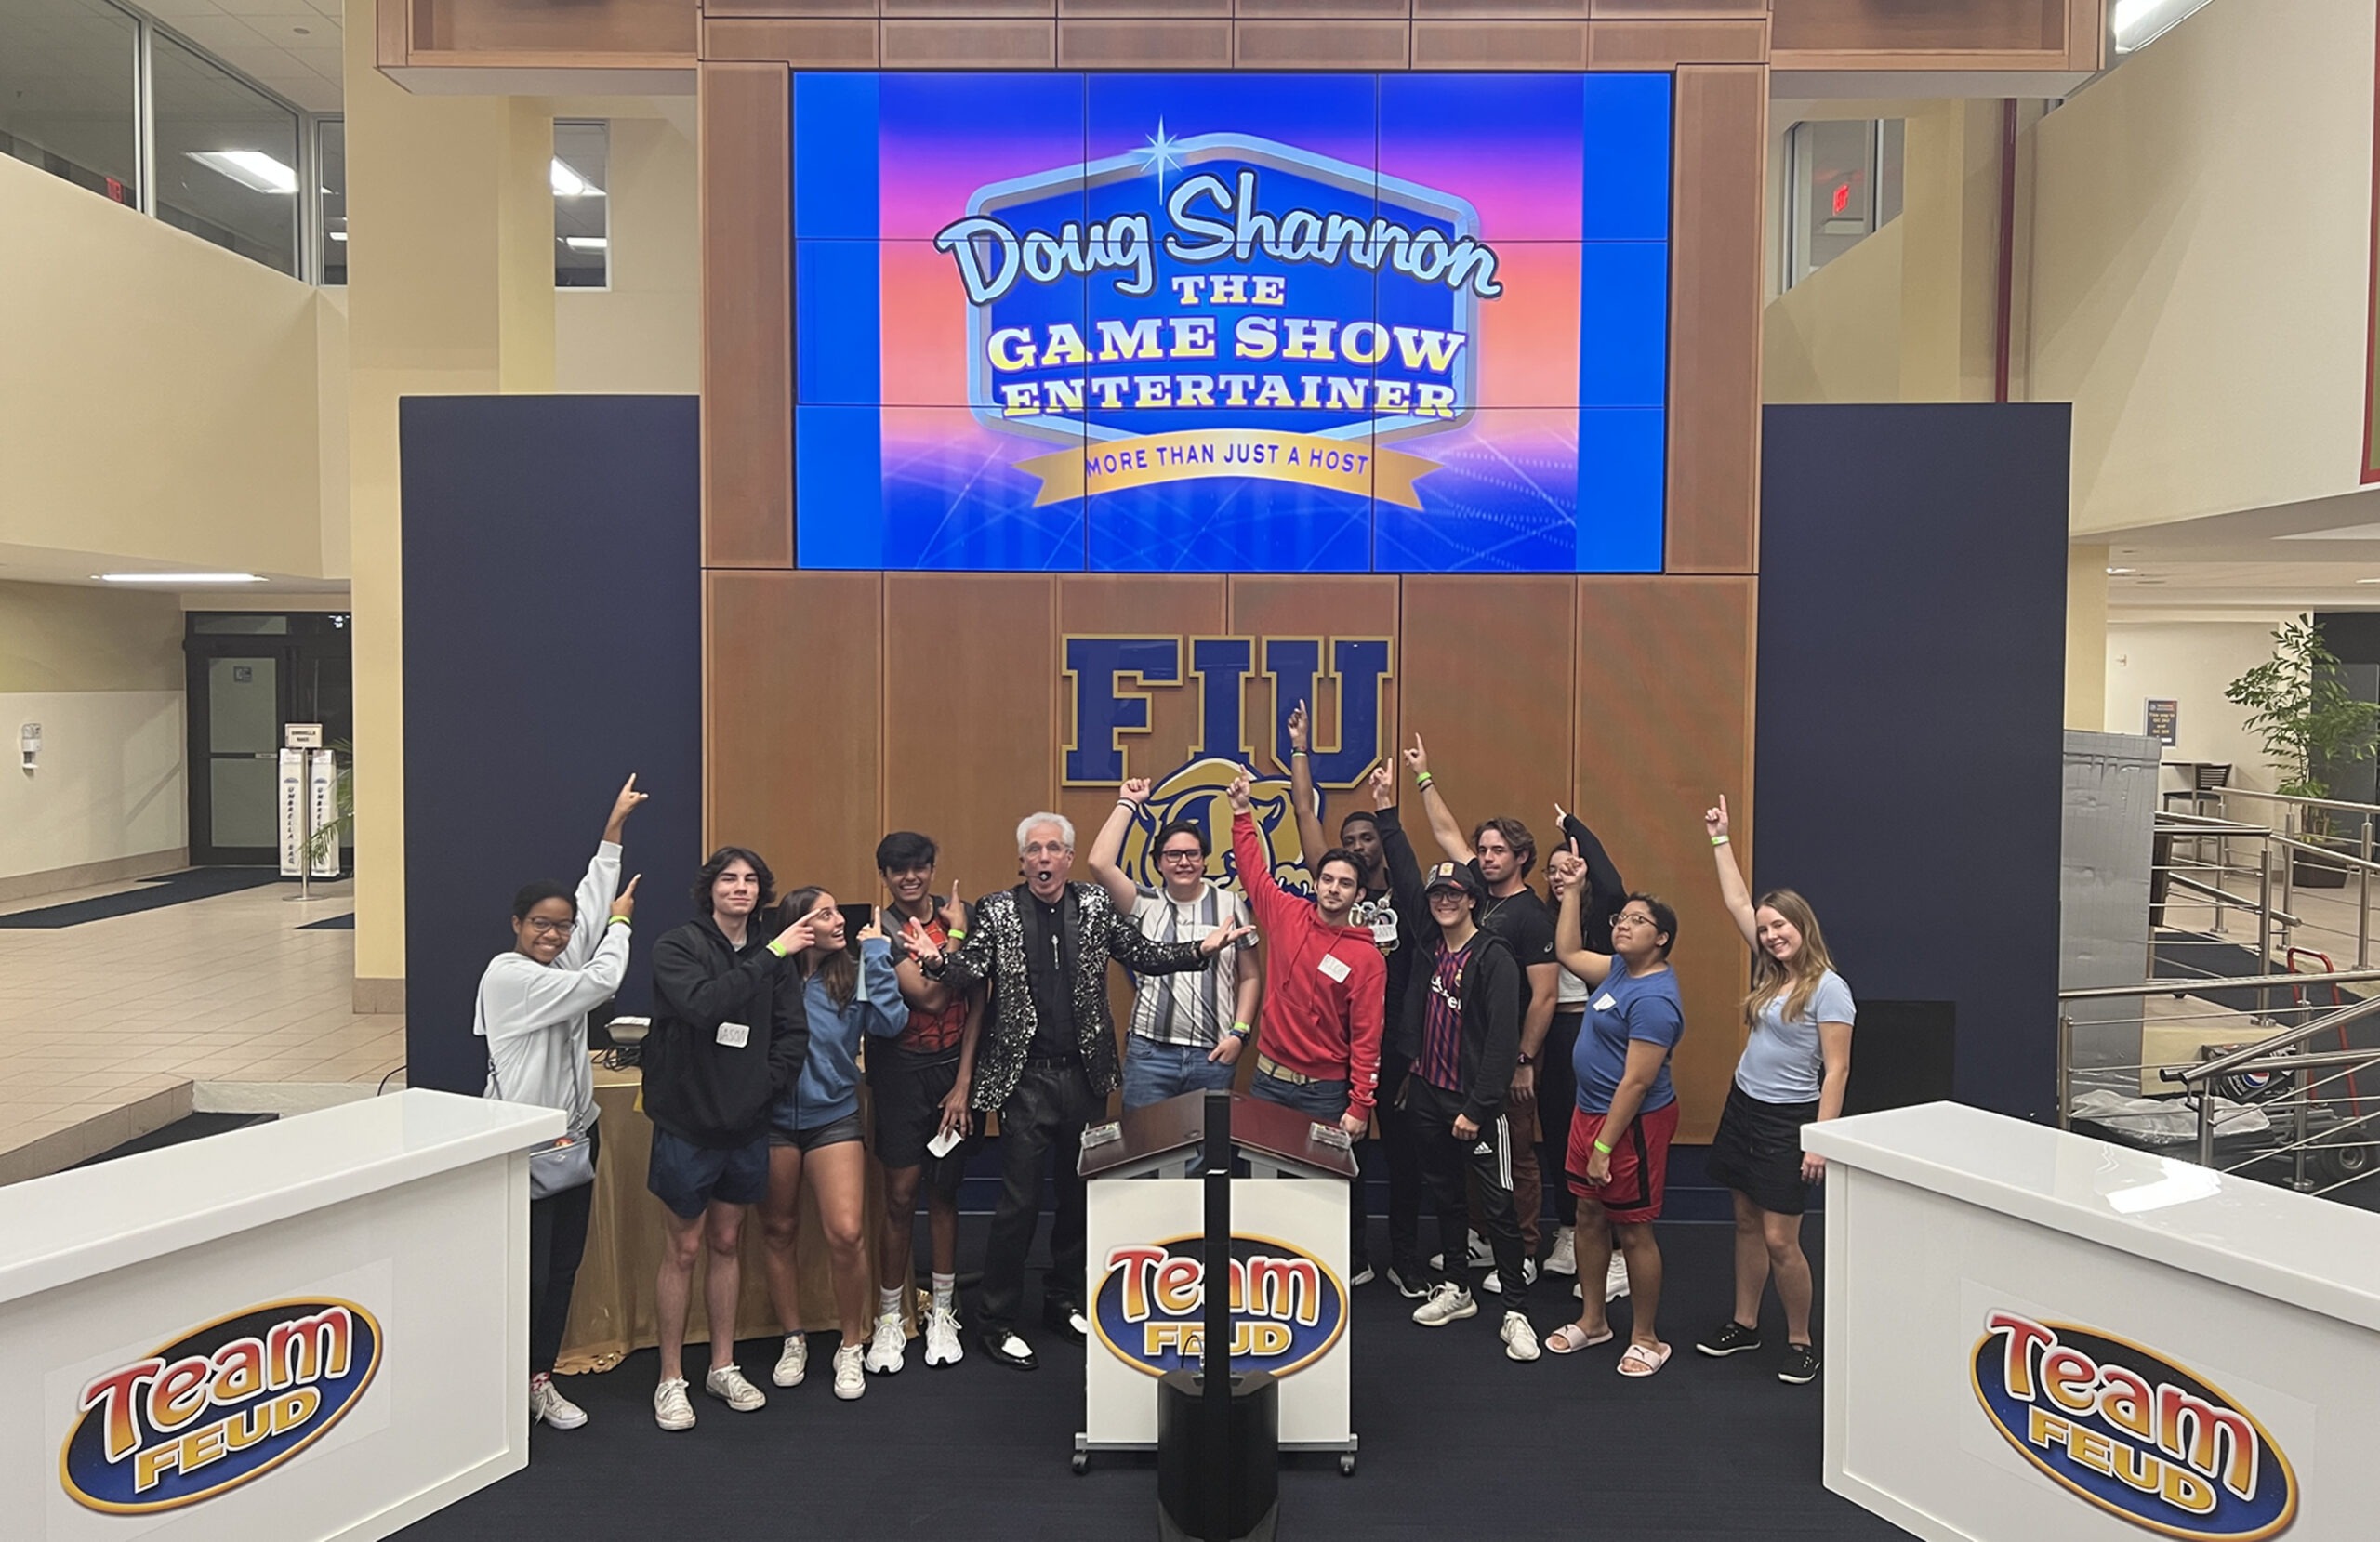 Two Team Feud With Doug Shannon at FIU with students pointing at Logo